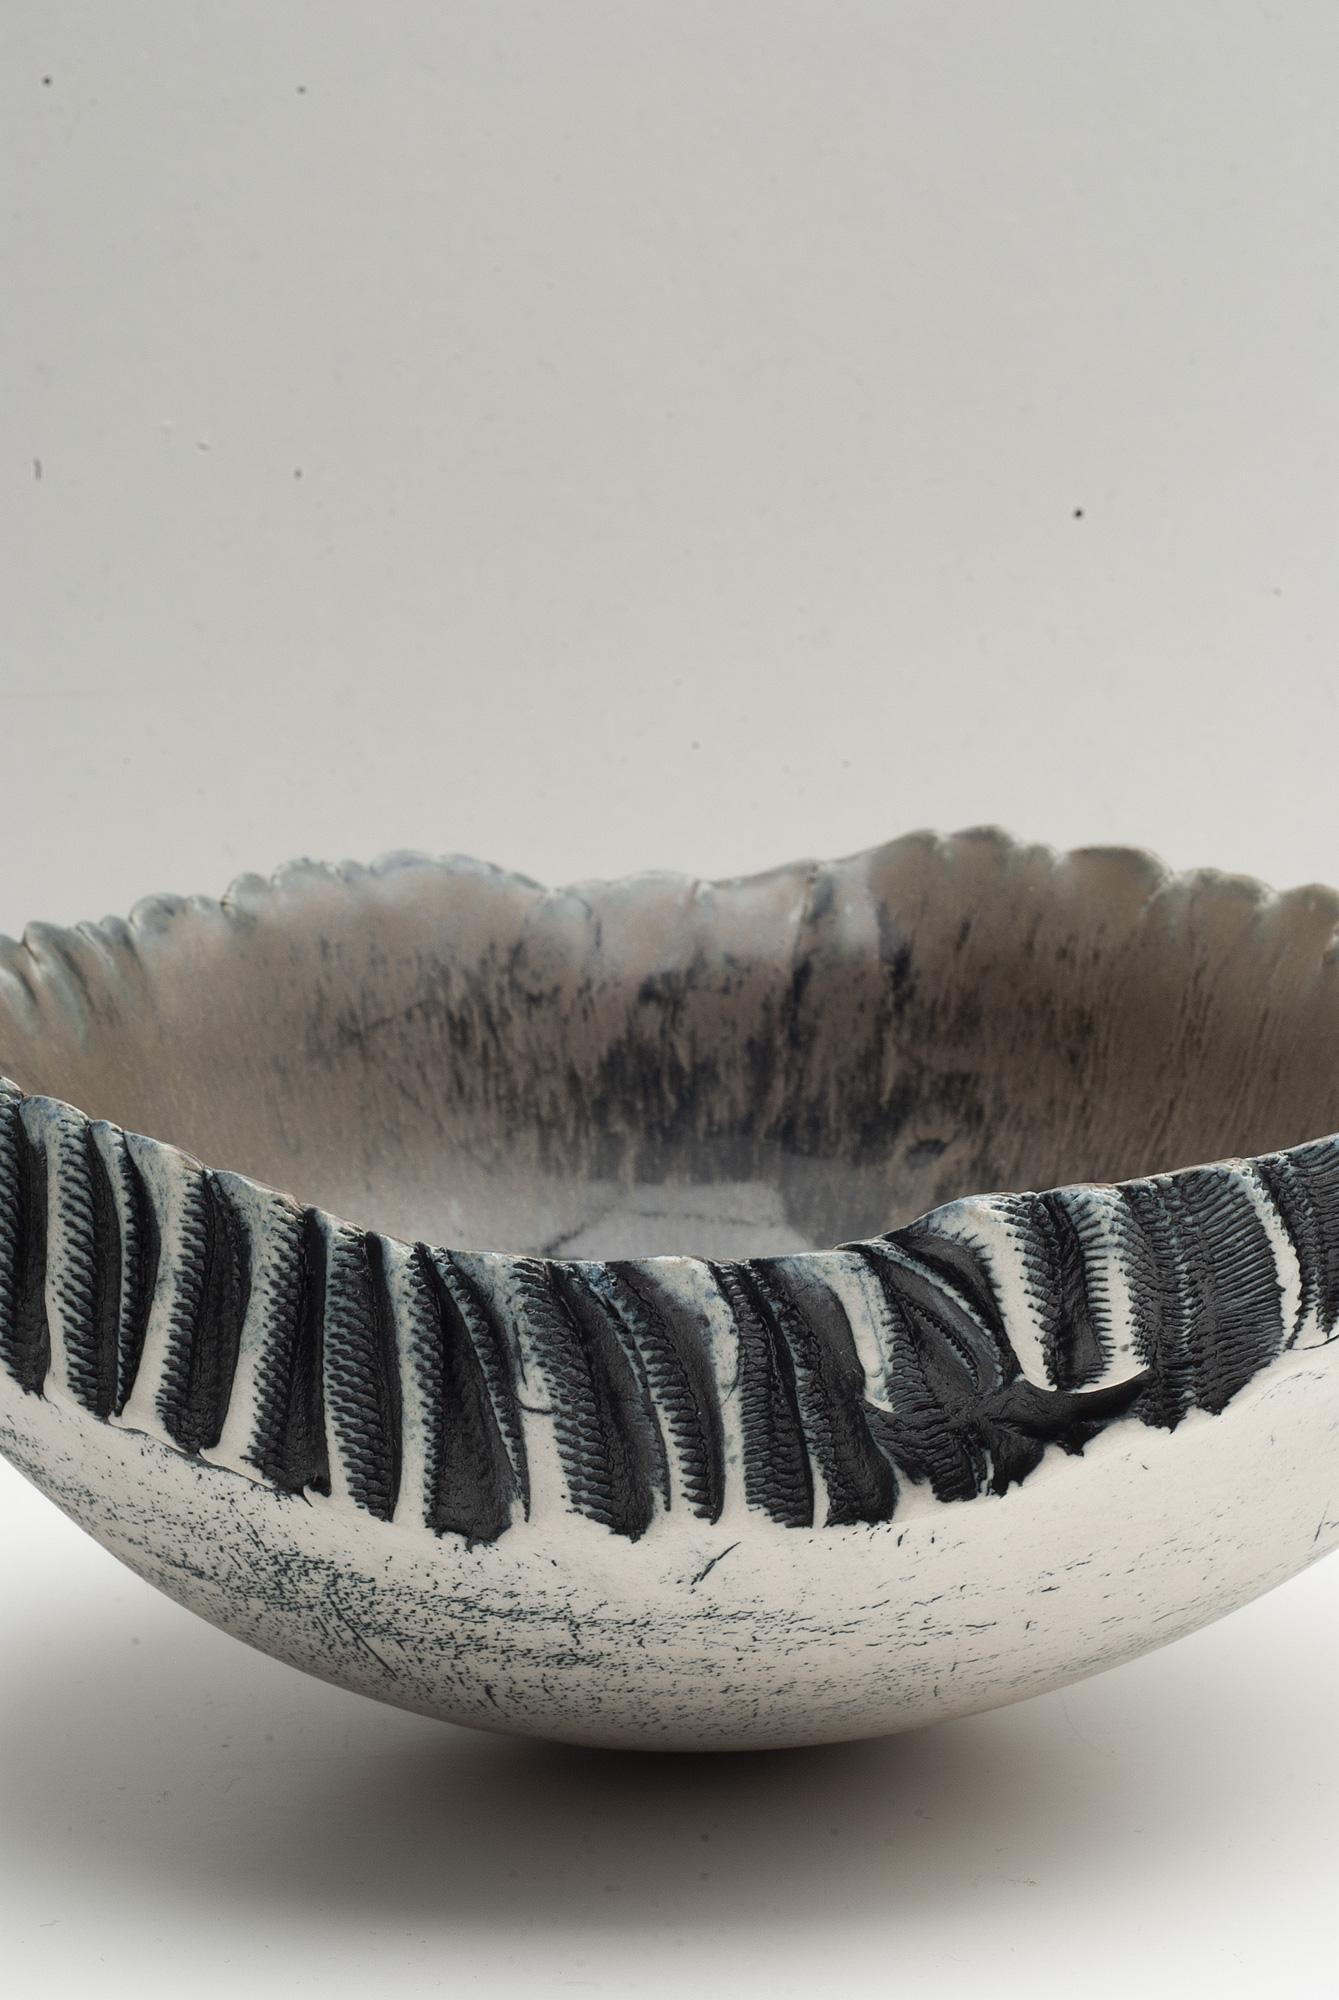 A unique and handmade 1960s bowl by Swedish artist Bengt Berglund for Gustavsberg. The exterior of the bowl is partially glazed, the interior glazed in ocher and black.

Berglund worked for Gustavsberg Studio between 1960 and 1982.